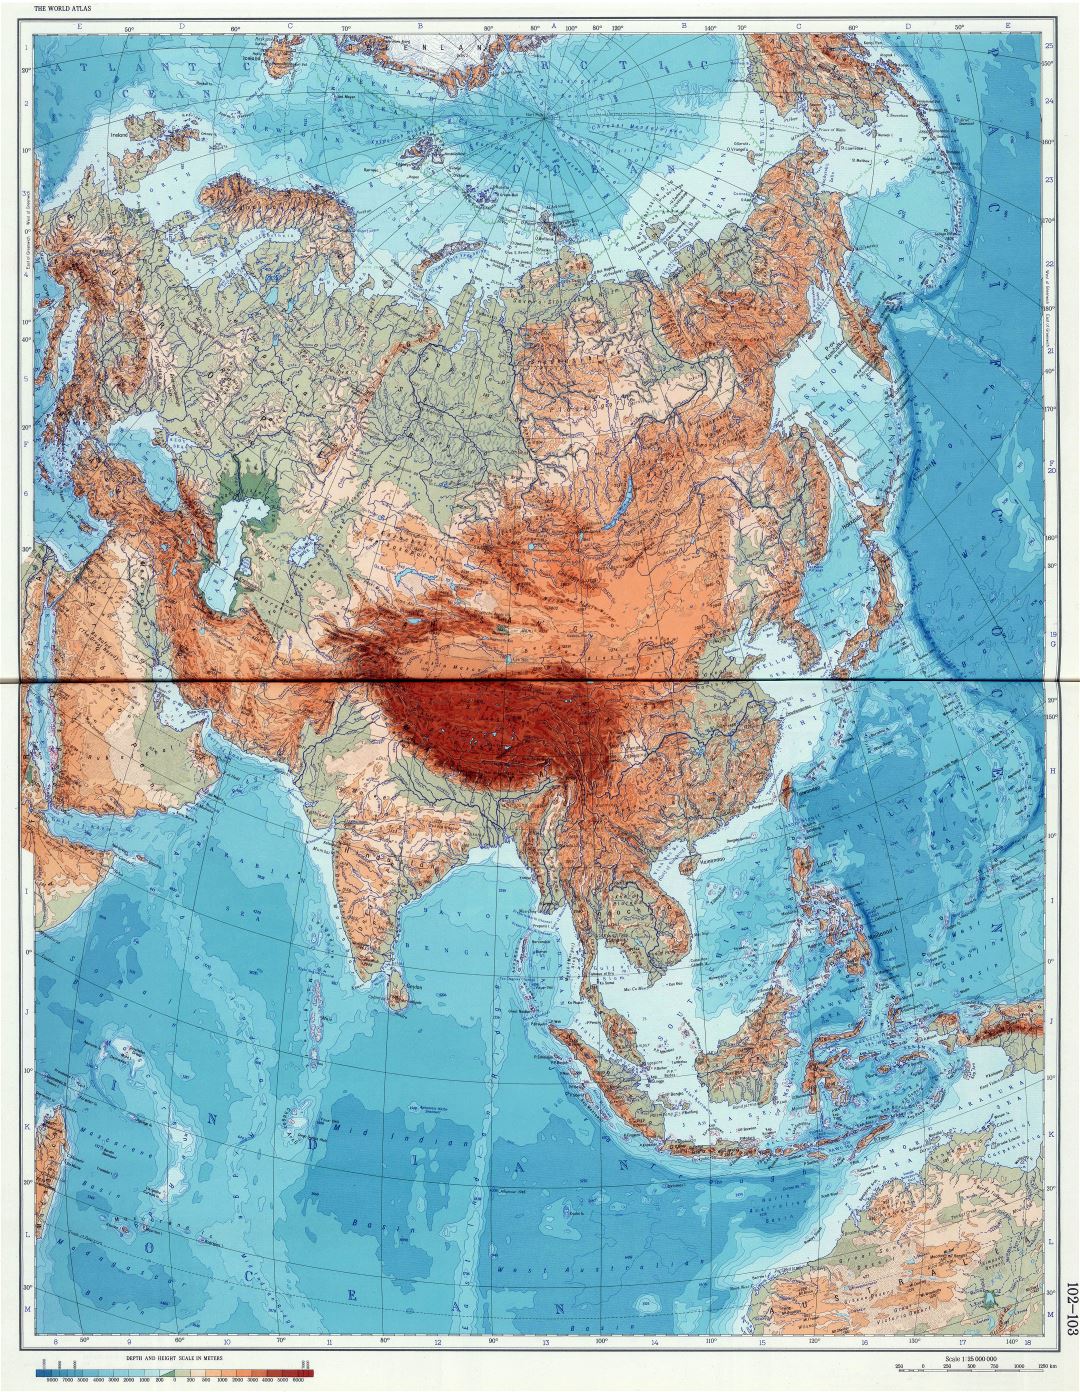 Large scale detailed physical (geographical) map of Eurasia